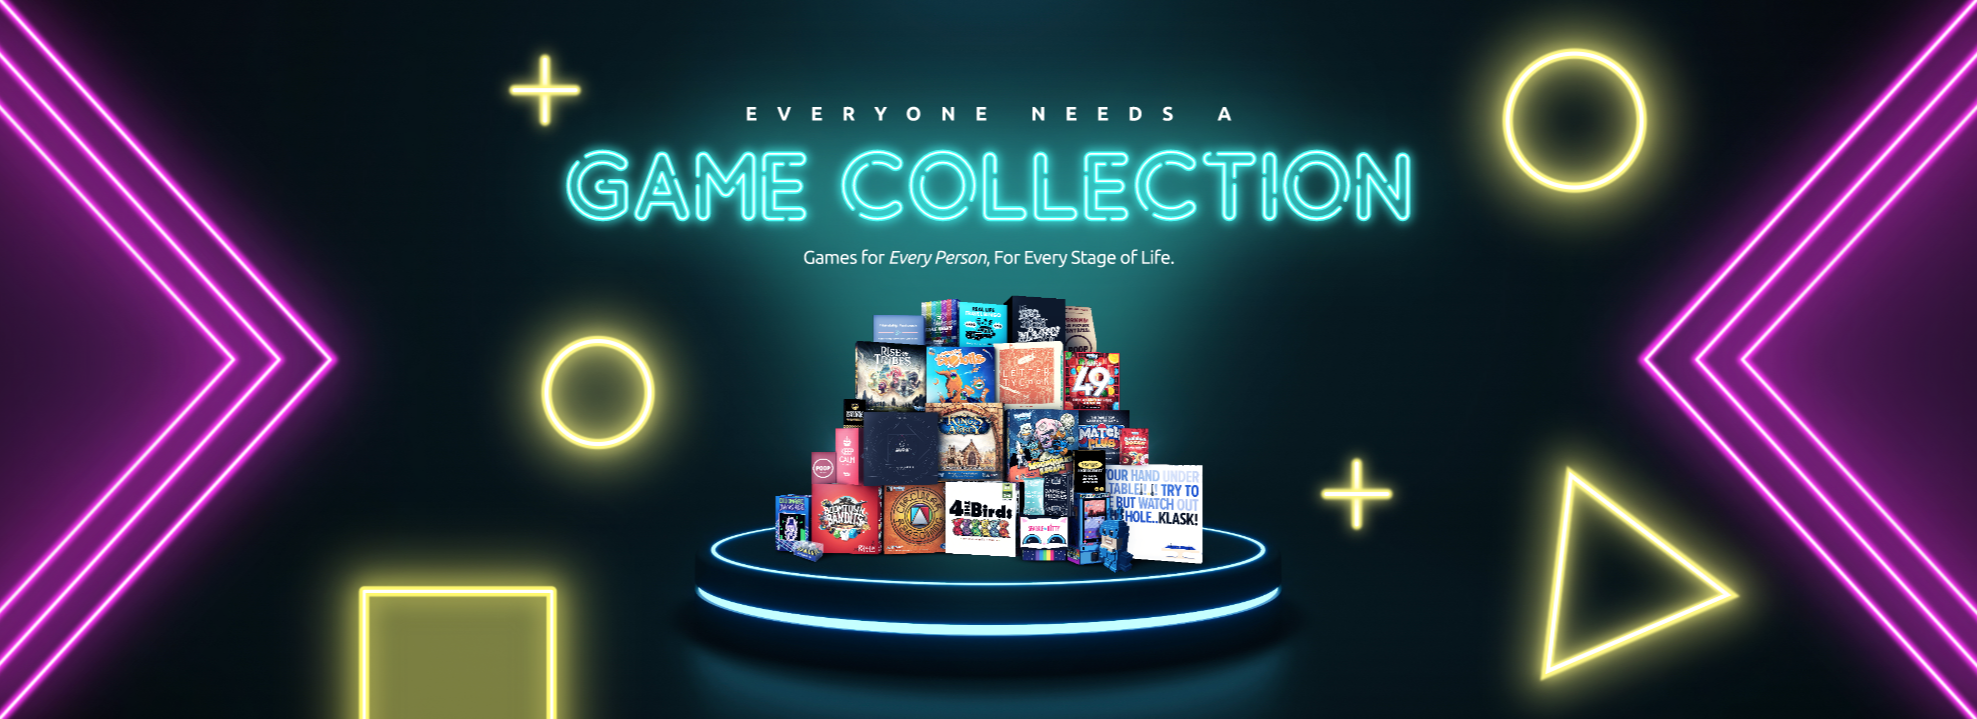 Breaking-Games-Game-Collection-Hero-Banner-01.png__PID:b5eb1622-8493-489d-adf3-577d001c9893